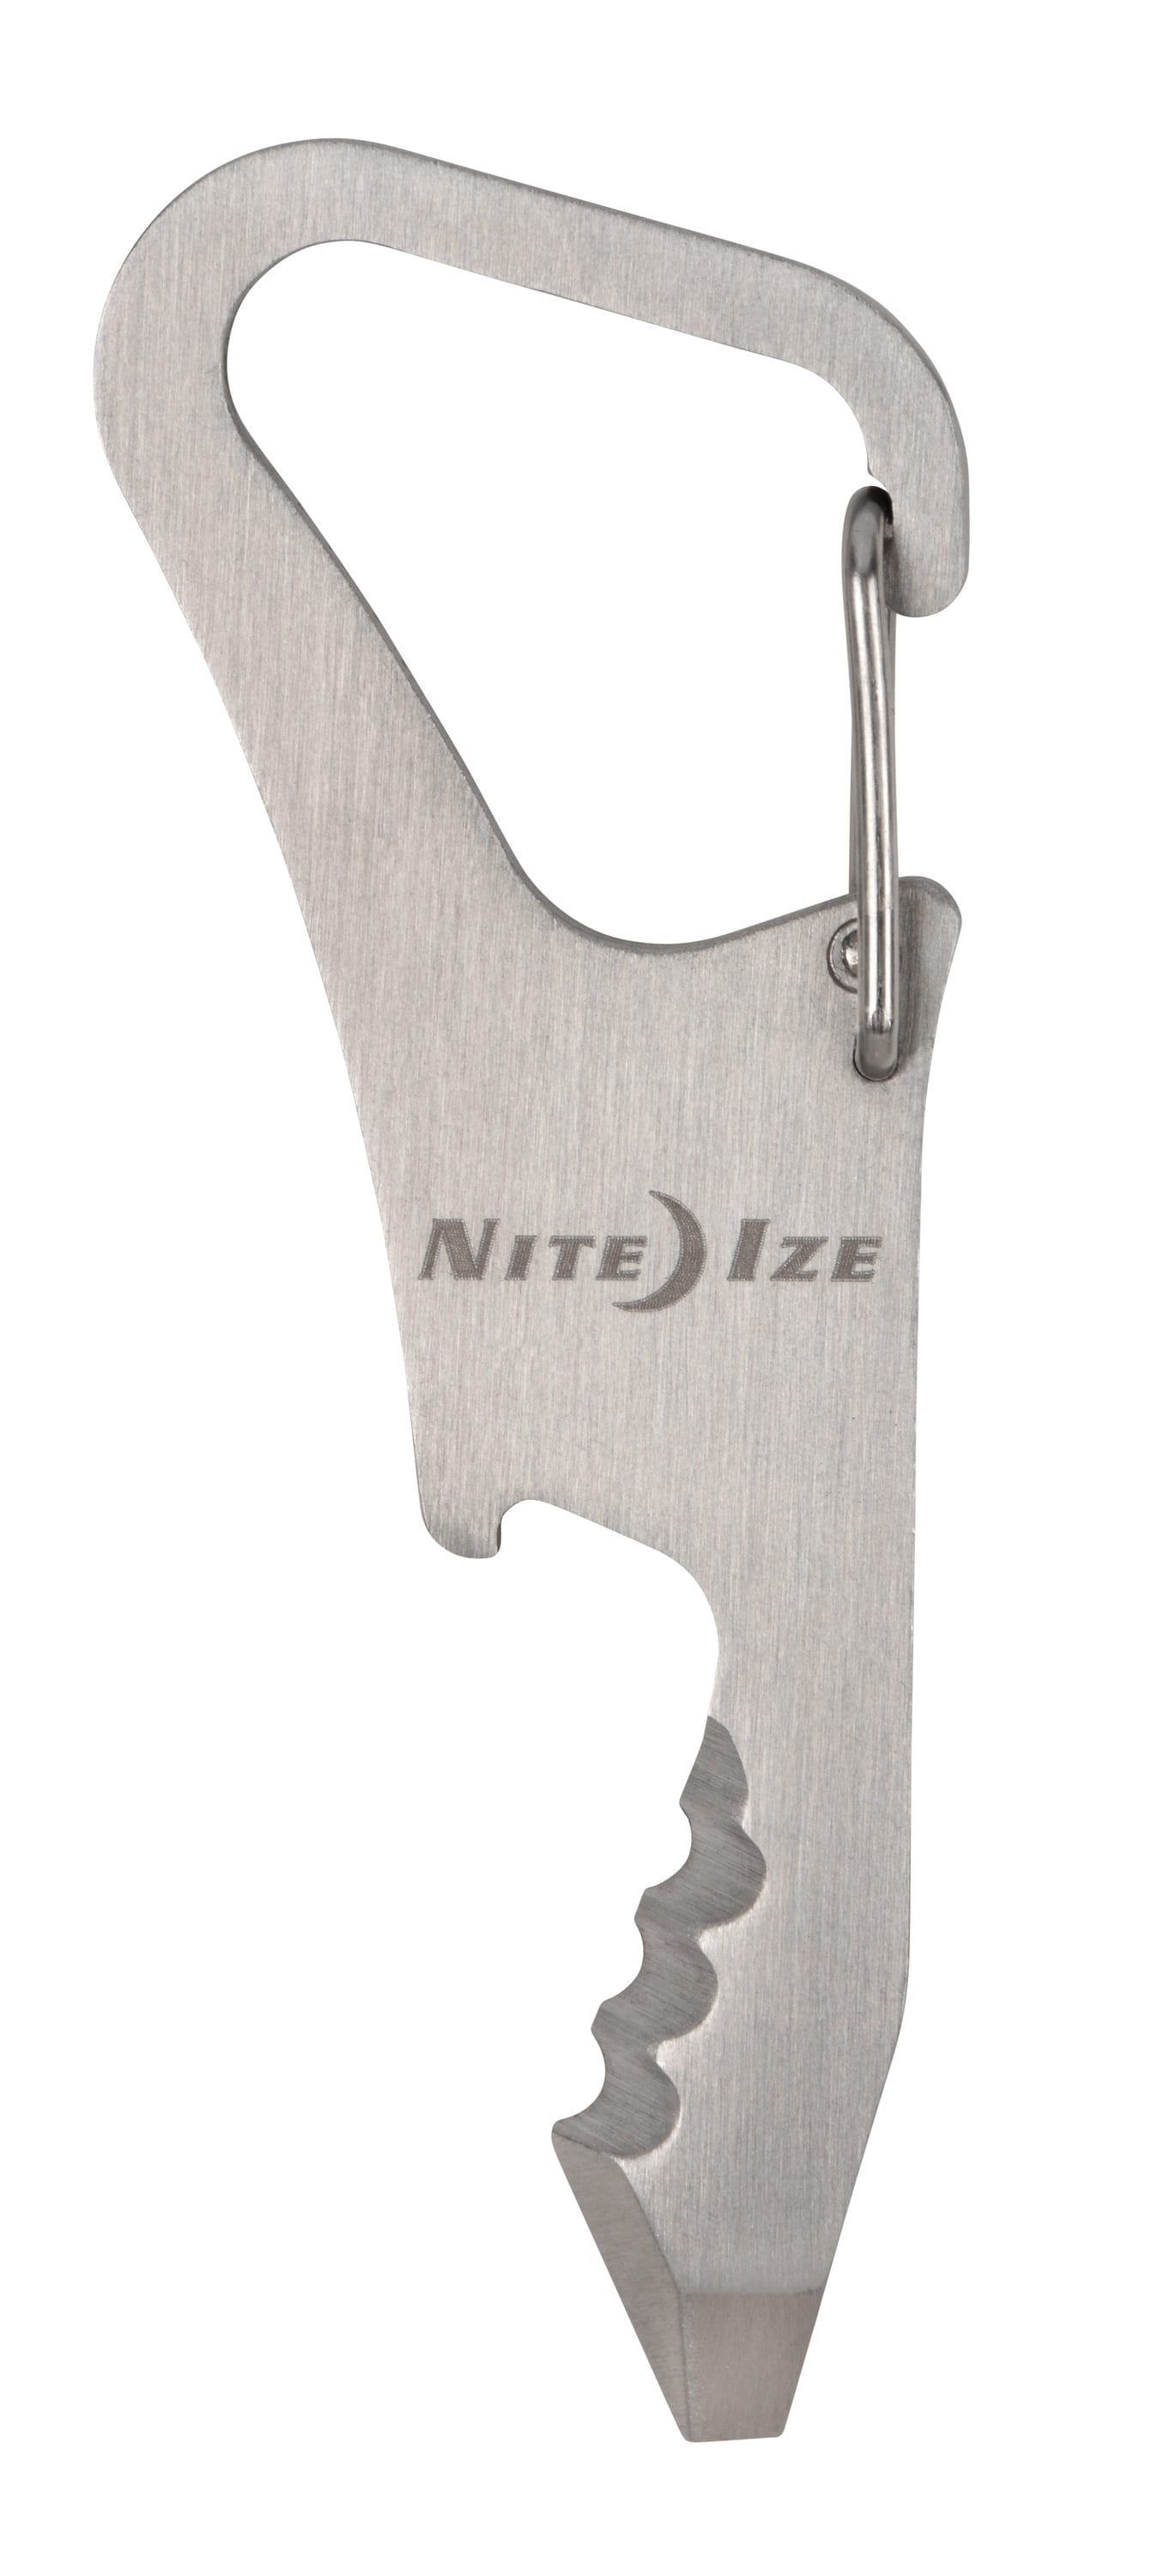 Nite Ize Stainless Steel Snap-Hook Key Ring with 5-in-1 Mini Multi Tool -  Durable and Convenient Key Accessory in the Key Accessories department at